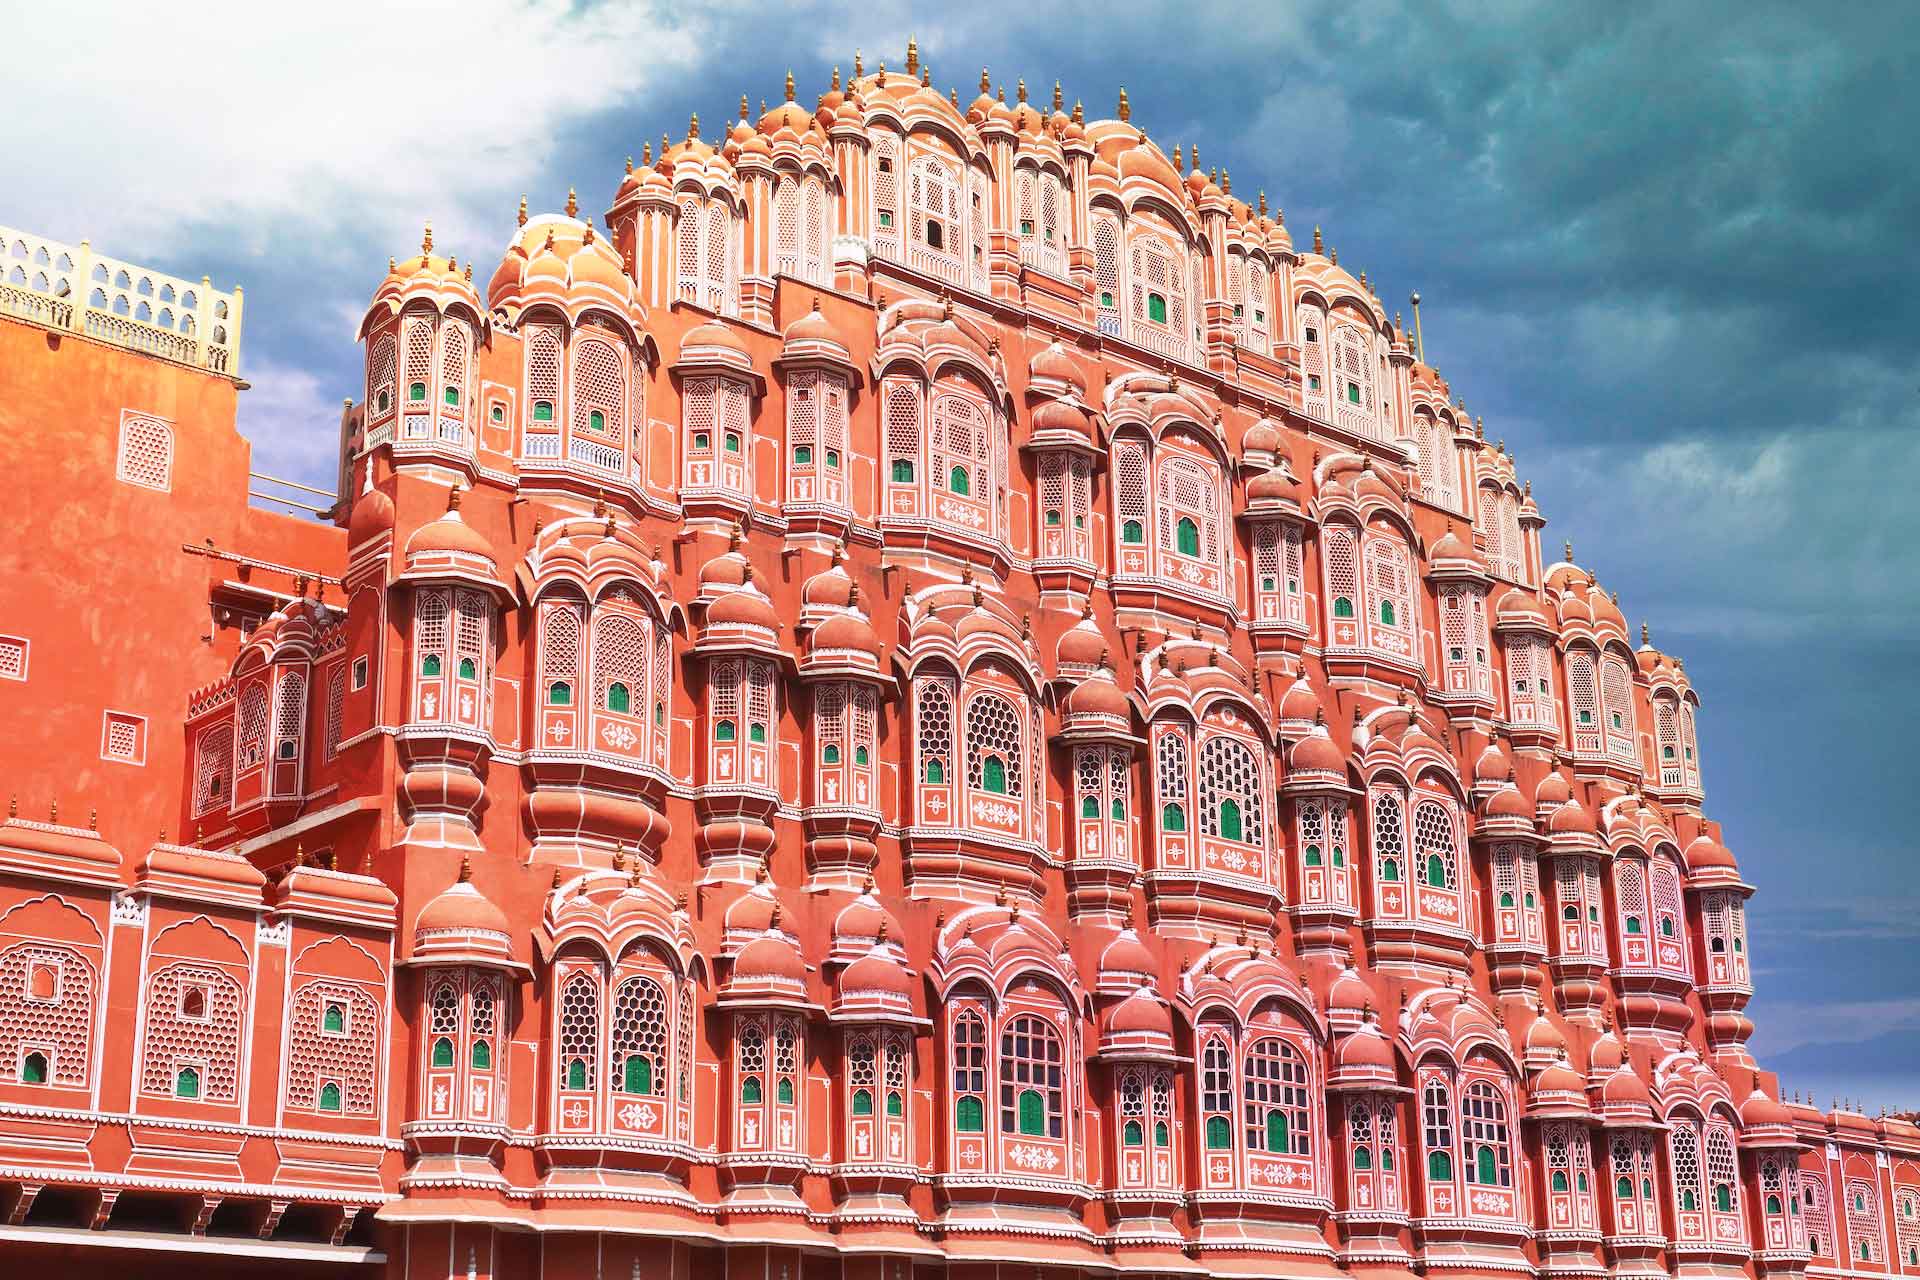 Hawa Mahal Palace or Palace of the Winds in Jaipur, Rajasthan state in India